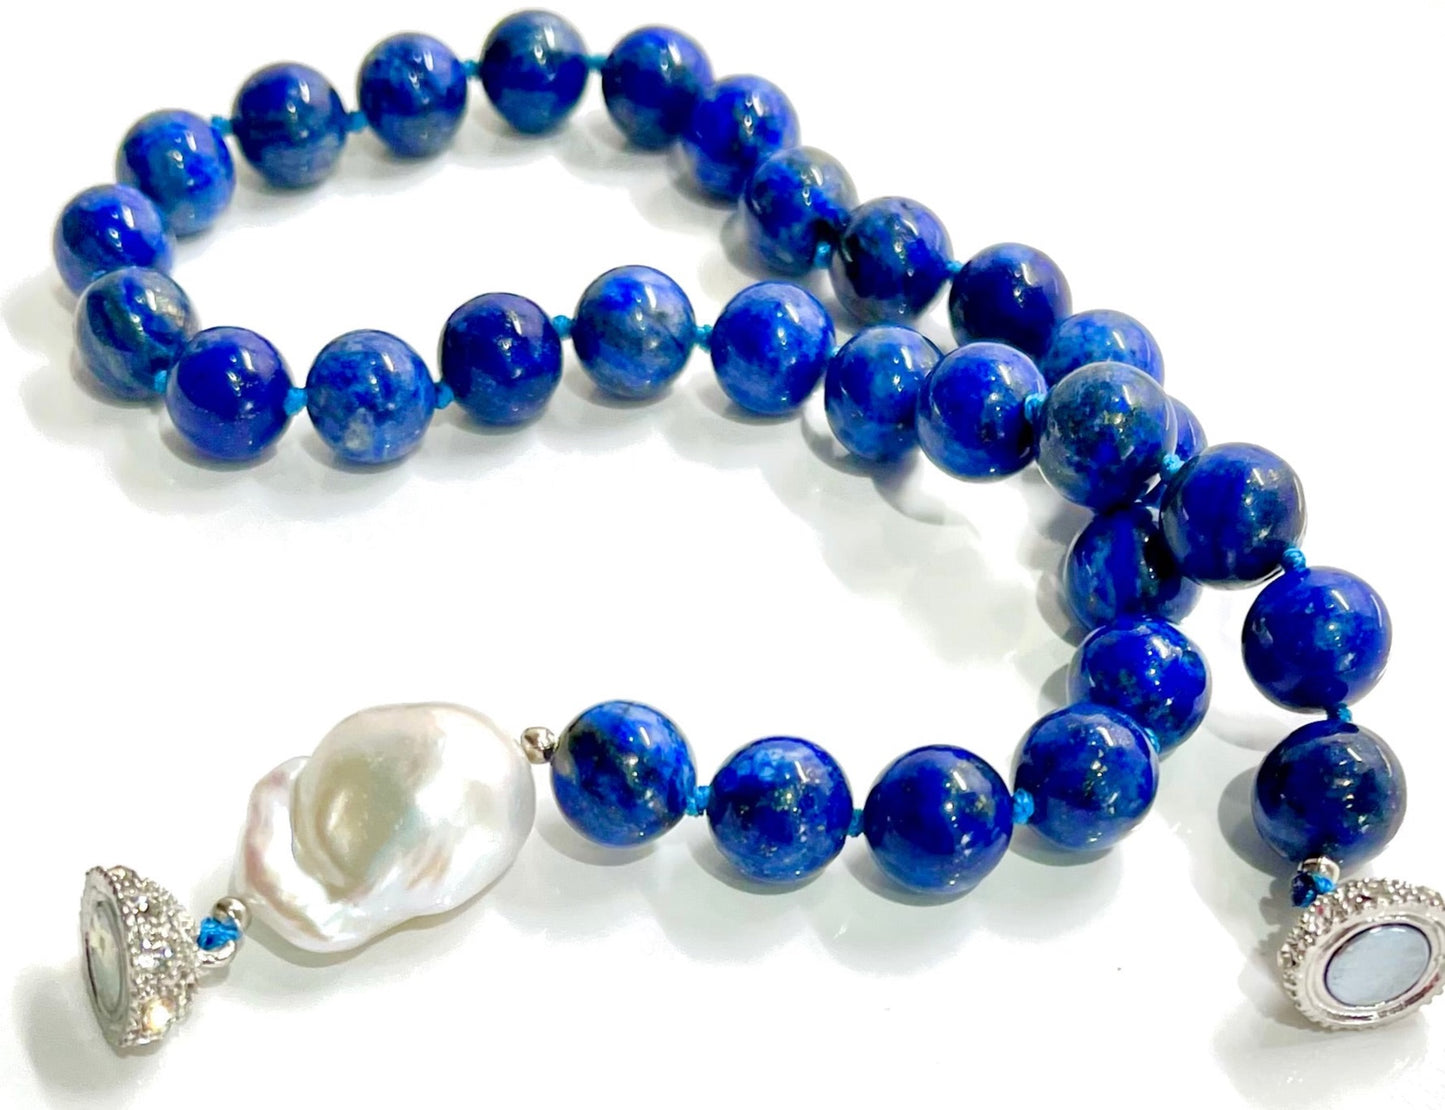 Lapis Lazuli & Baroque Pearl Gemstone Statement Necklace with Magnetic Clasp